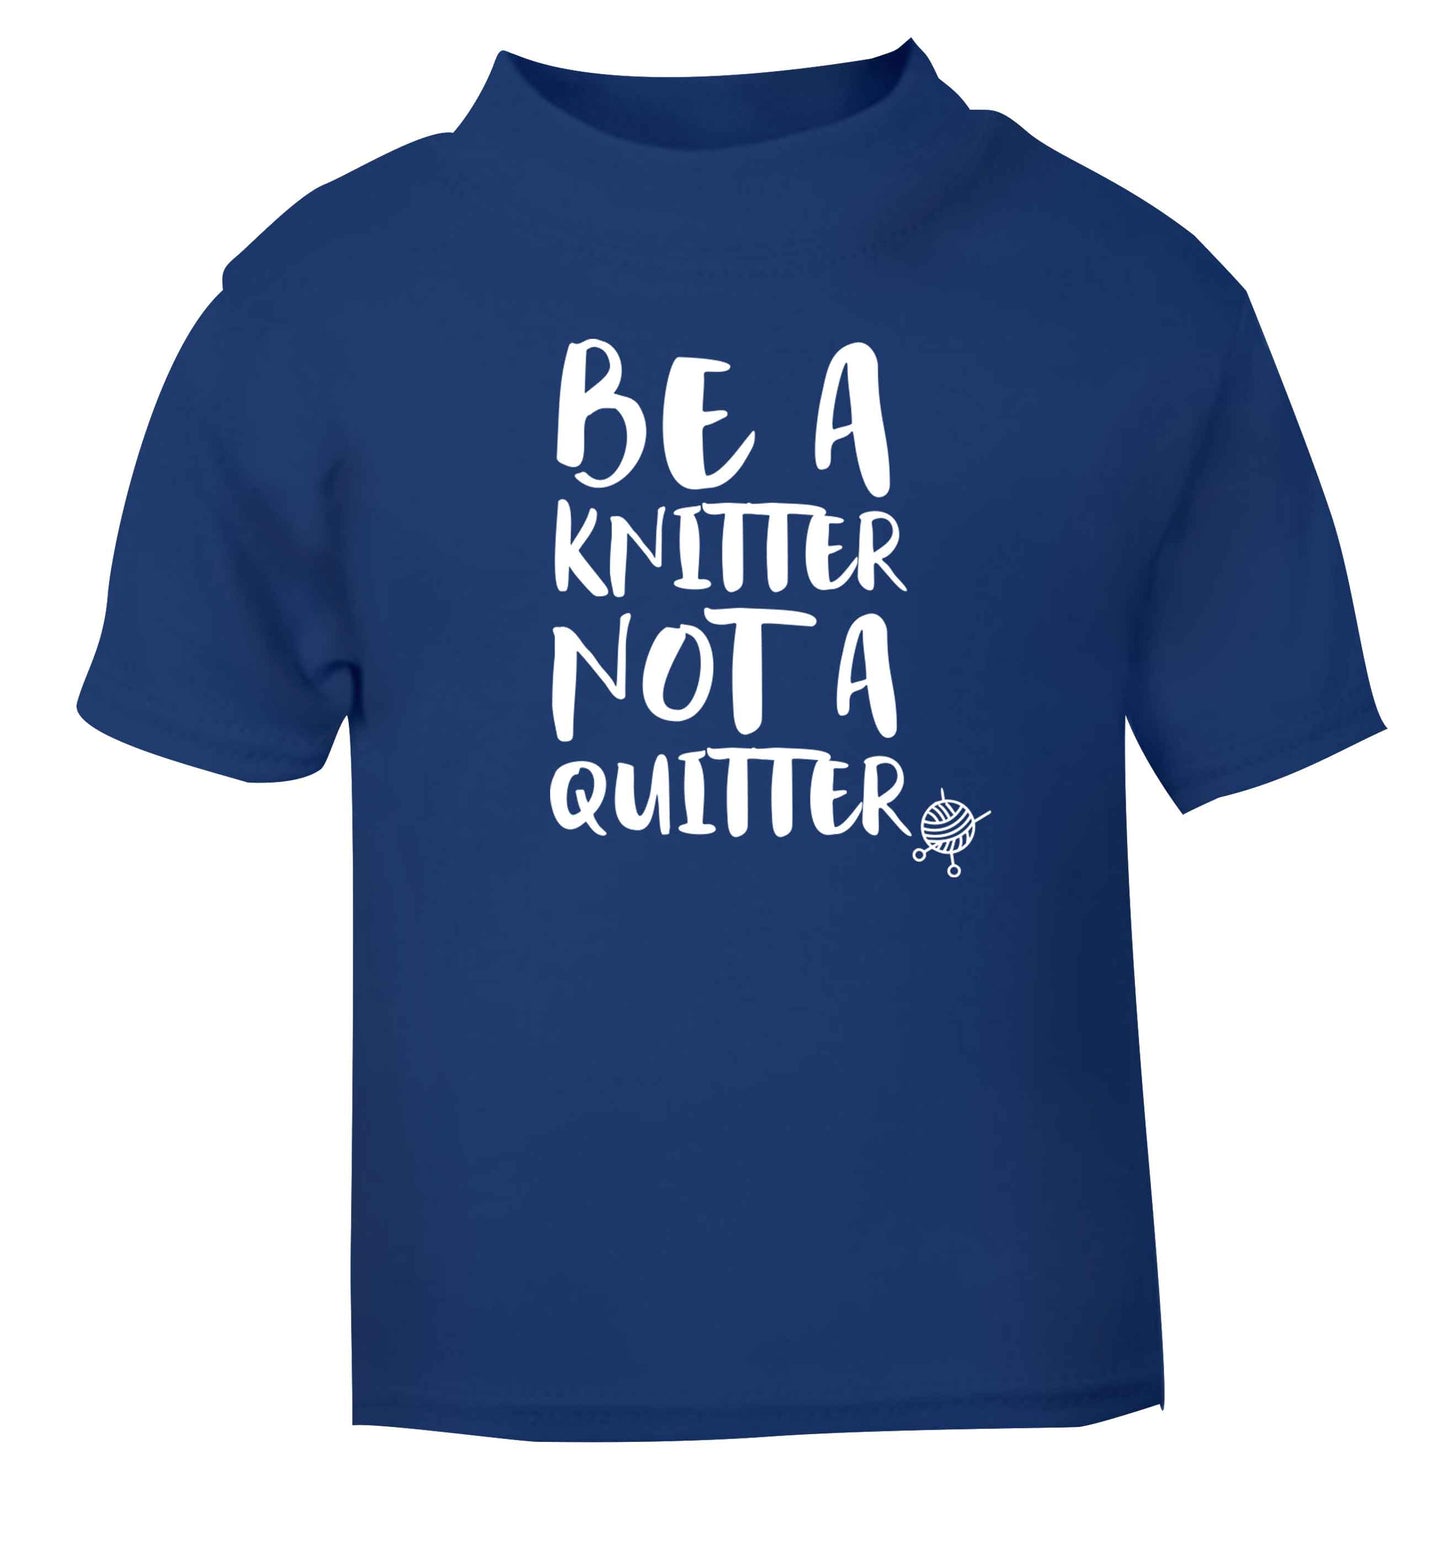 Be a knitter not a quitter blue Baby Toddler Tshirt 2 Years